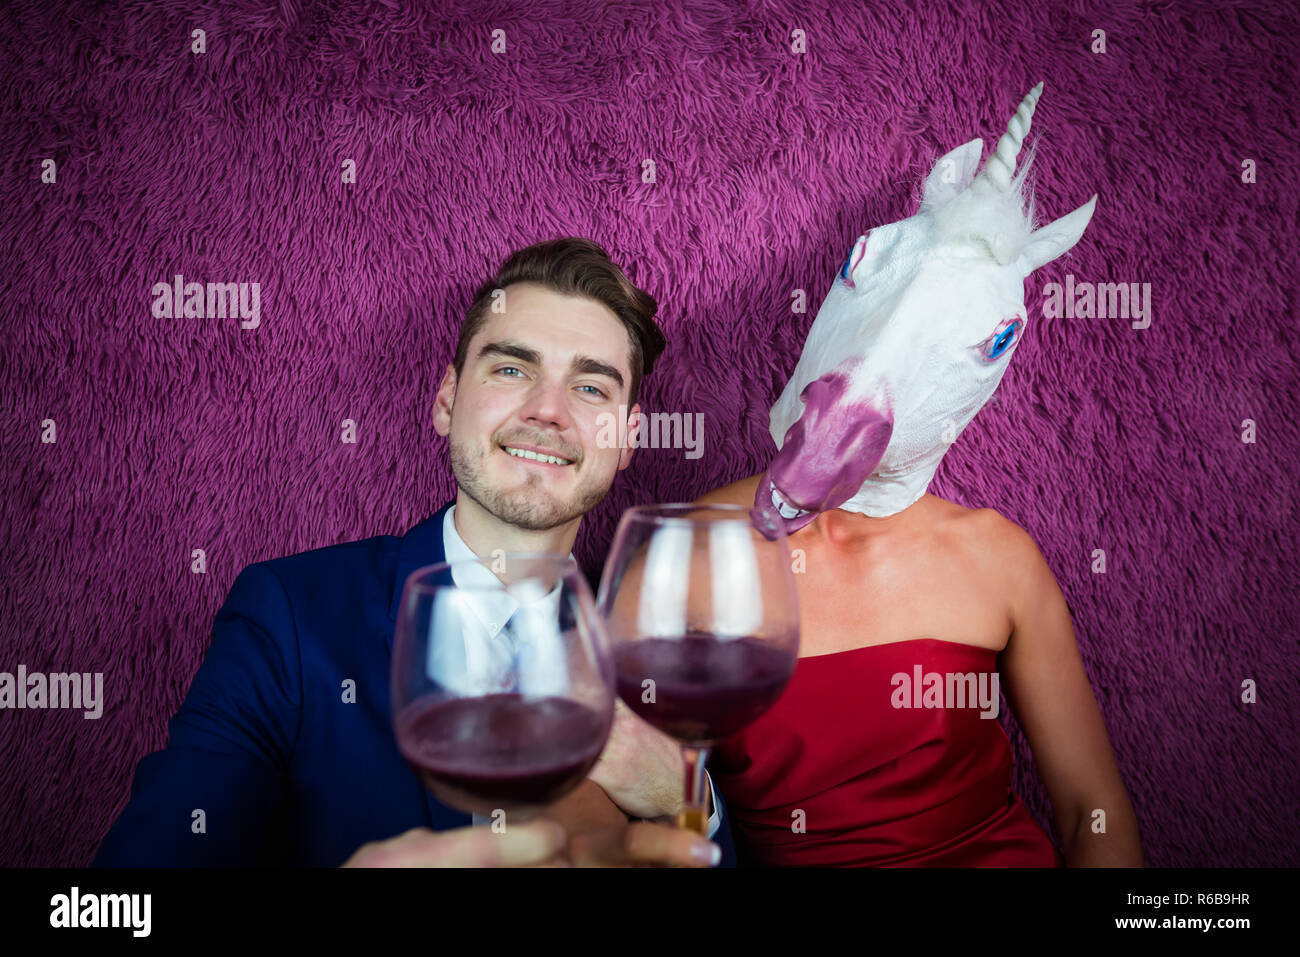 Portrait of strange couple on purple background. Freaky young woman in comical mask drinking wine with guy in suit. Young man with girl unicorn. Stock Photo